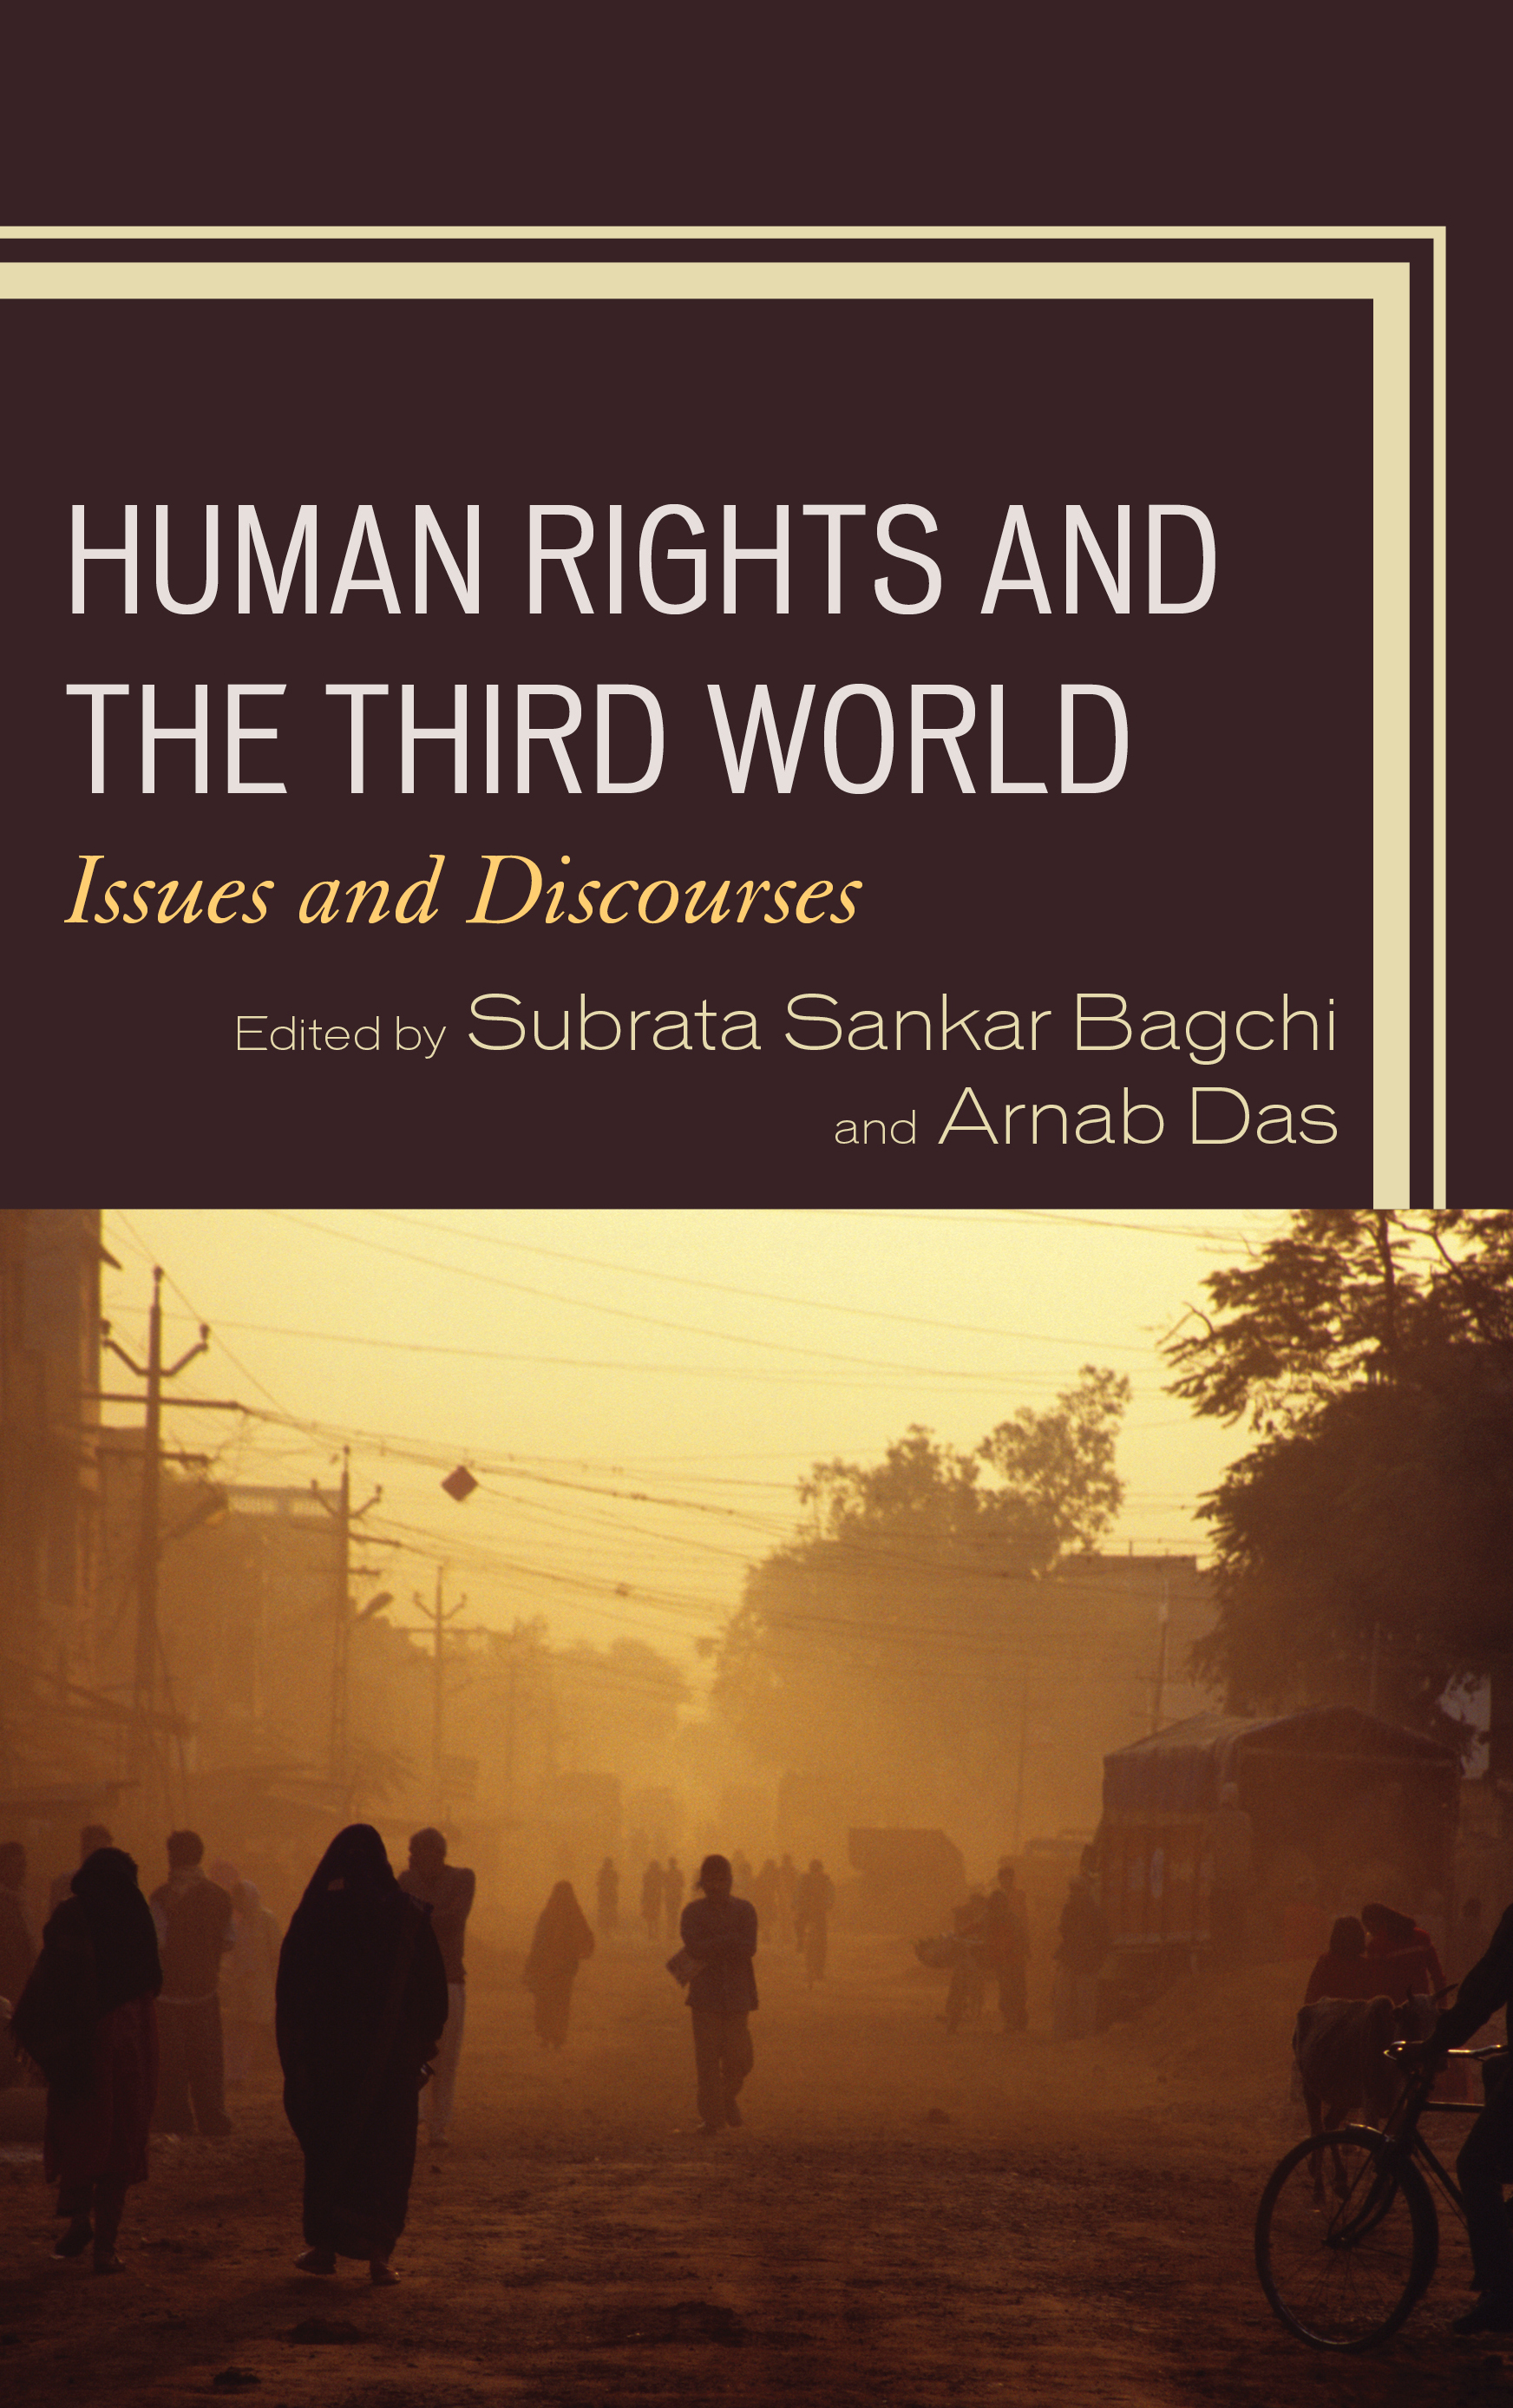 Human Rights and the Third World: Issues and Discourses